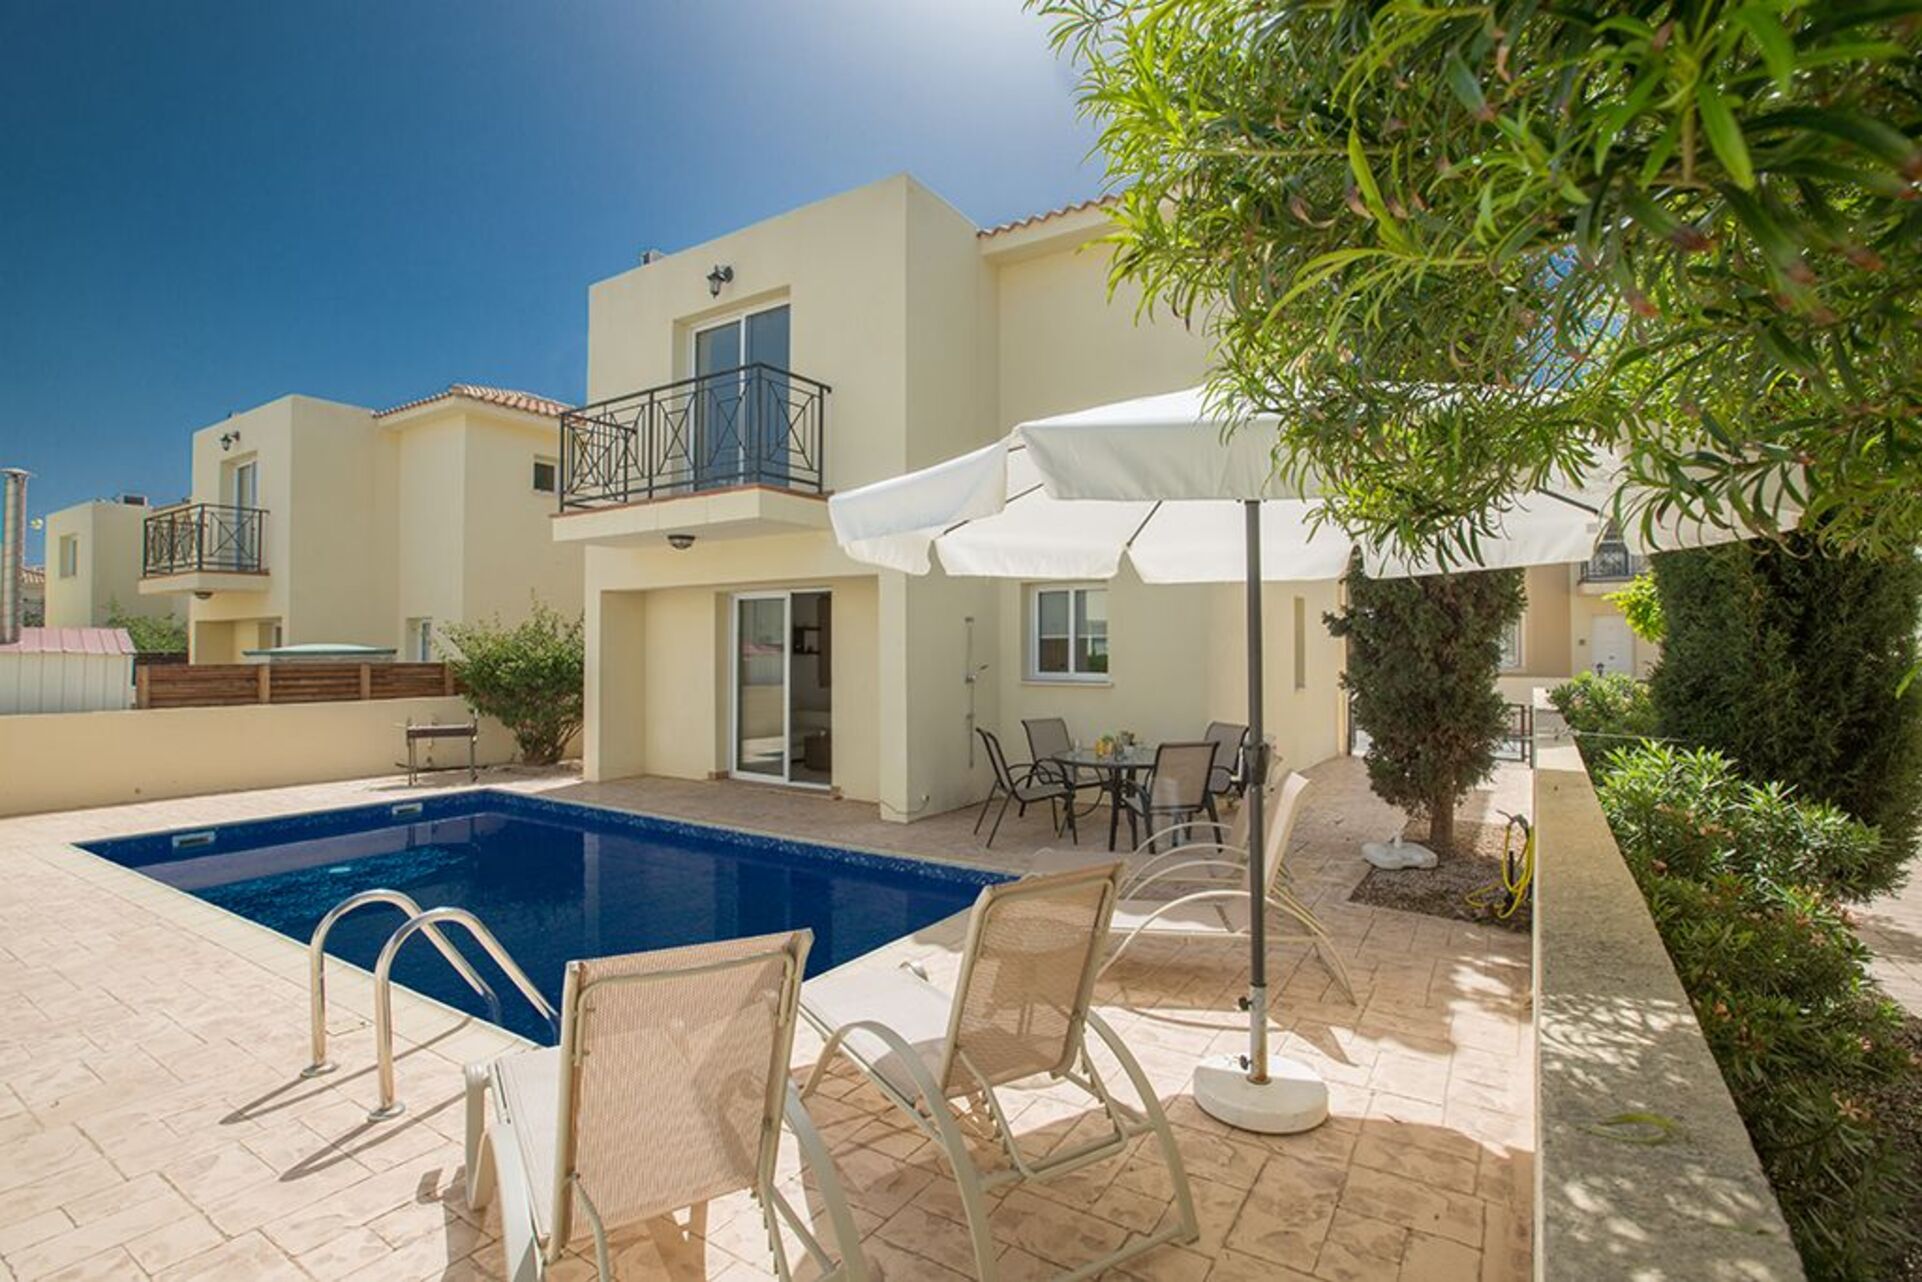 Property Image 2 - Picture This, Enjoying Your Holiday in a Luxury Villa in Protaras,For Less Than a Hotel, Paralimni Villa 1